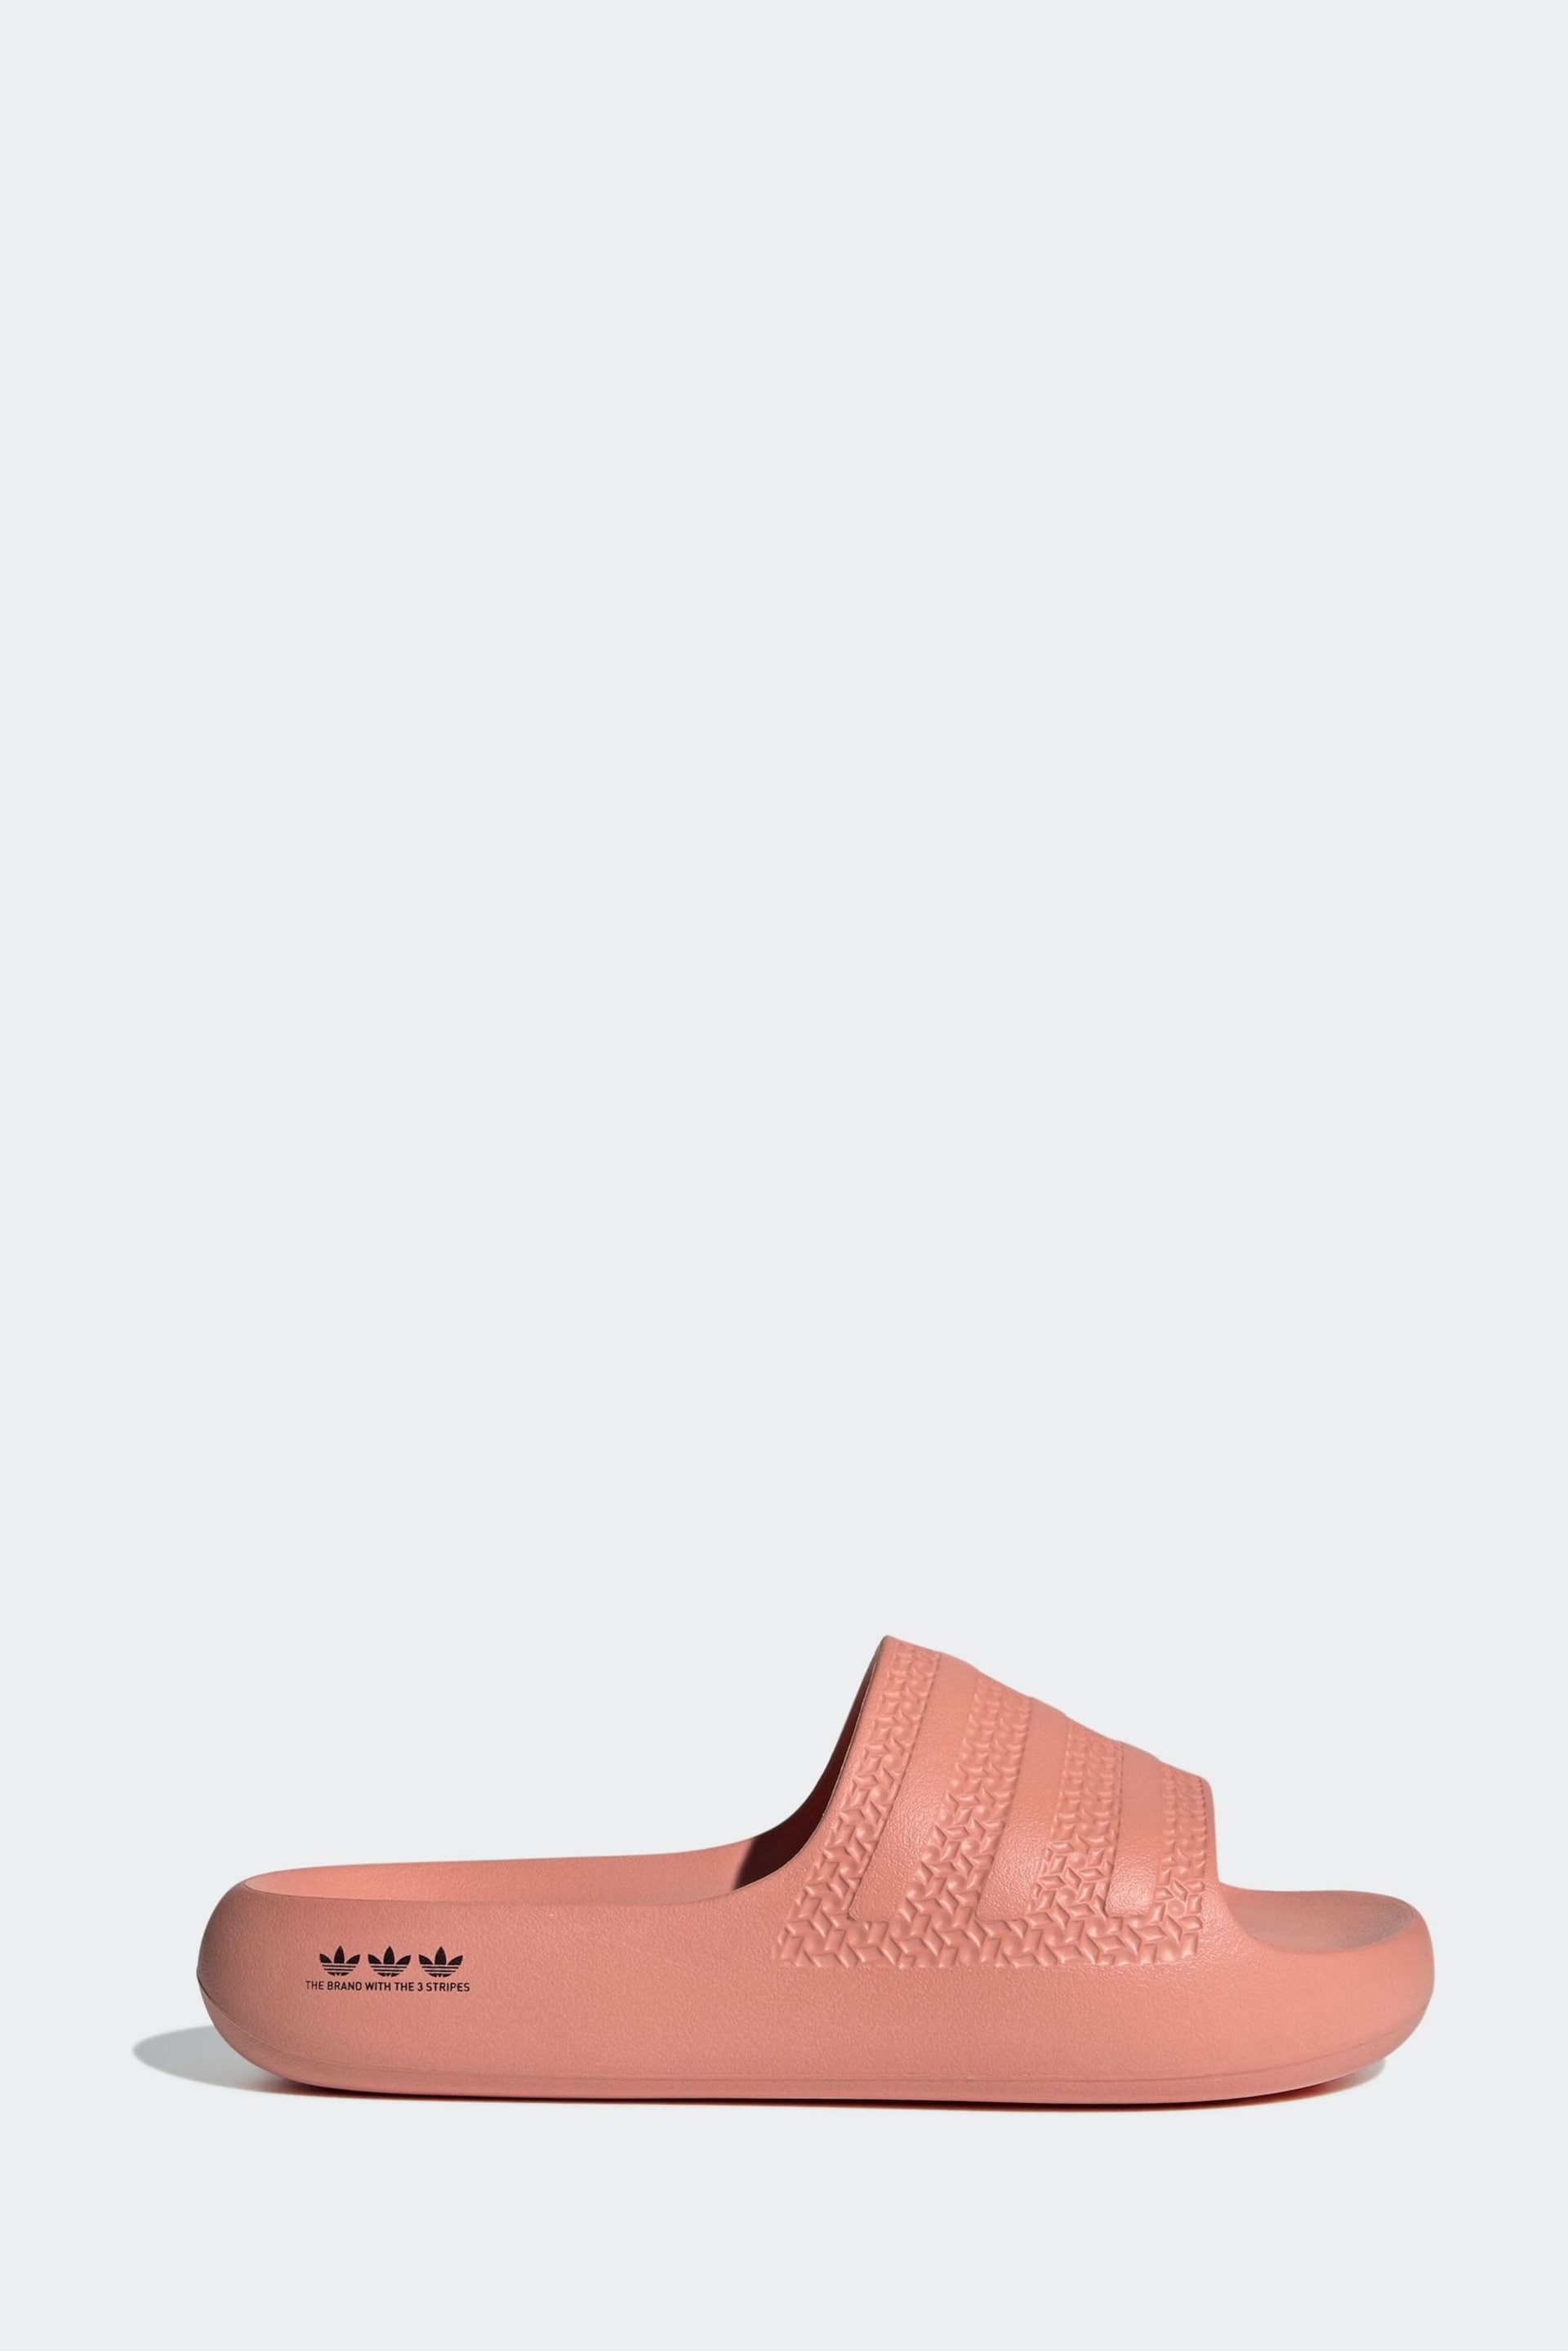 adidas Red Adilette Ayoon Sandals - Image 1 of 8